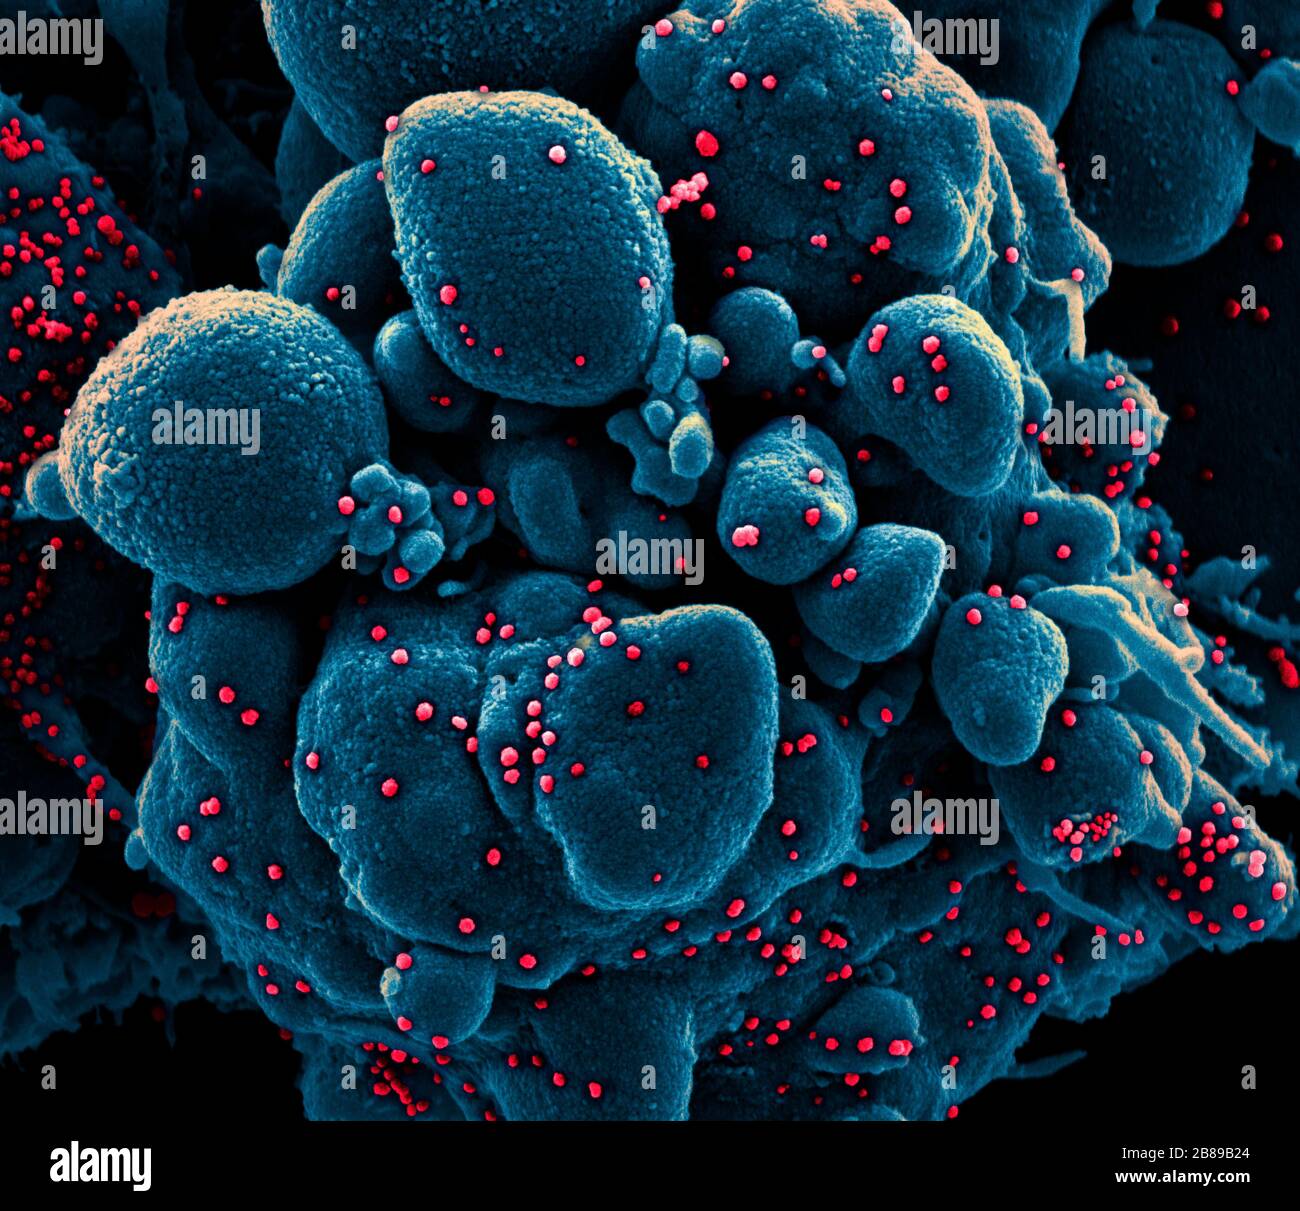 A transmission electron micrograph of COVID-19, novel coronavirus, an apoptotic cell heavily infected with SARS-COV-2 virus particles, isolated from a patient sample at the NIAID Integrated Research Facility March 18, 2020 in Fort Detrick, Maryland. Stock Photo